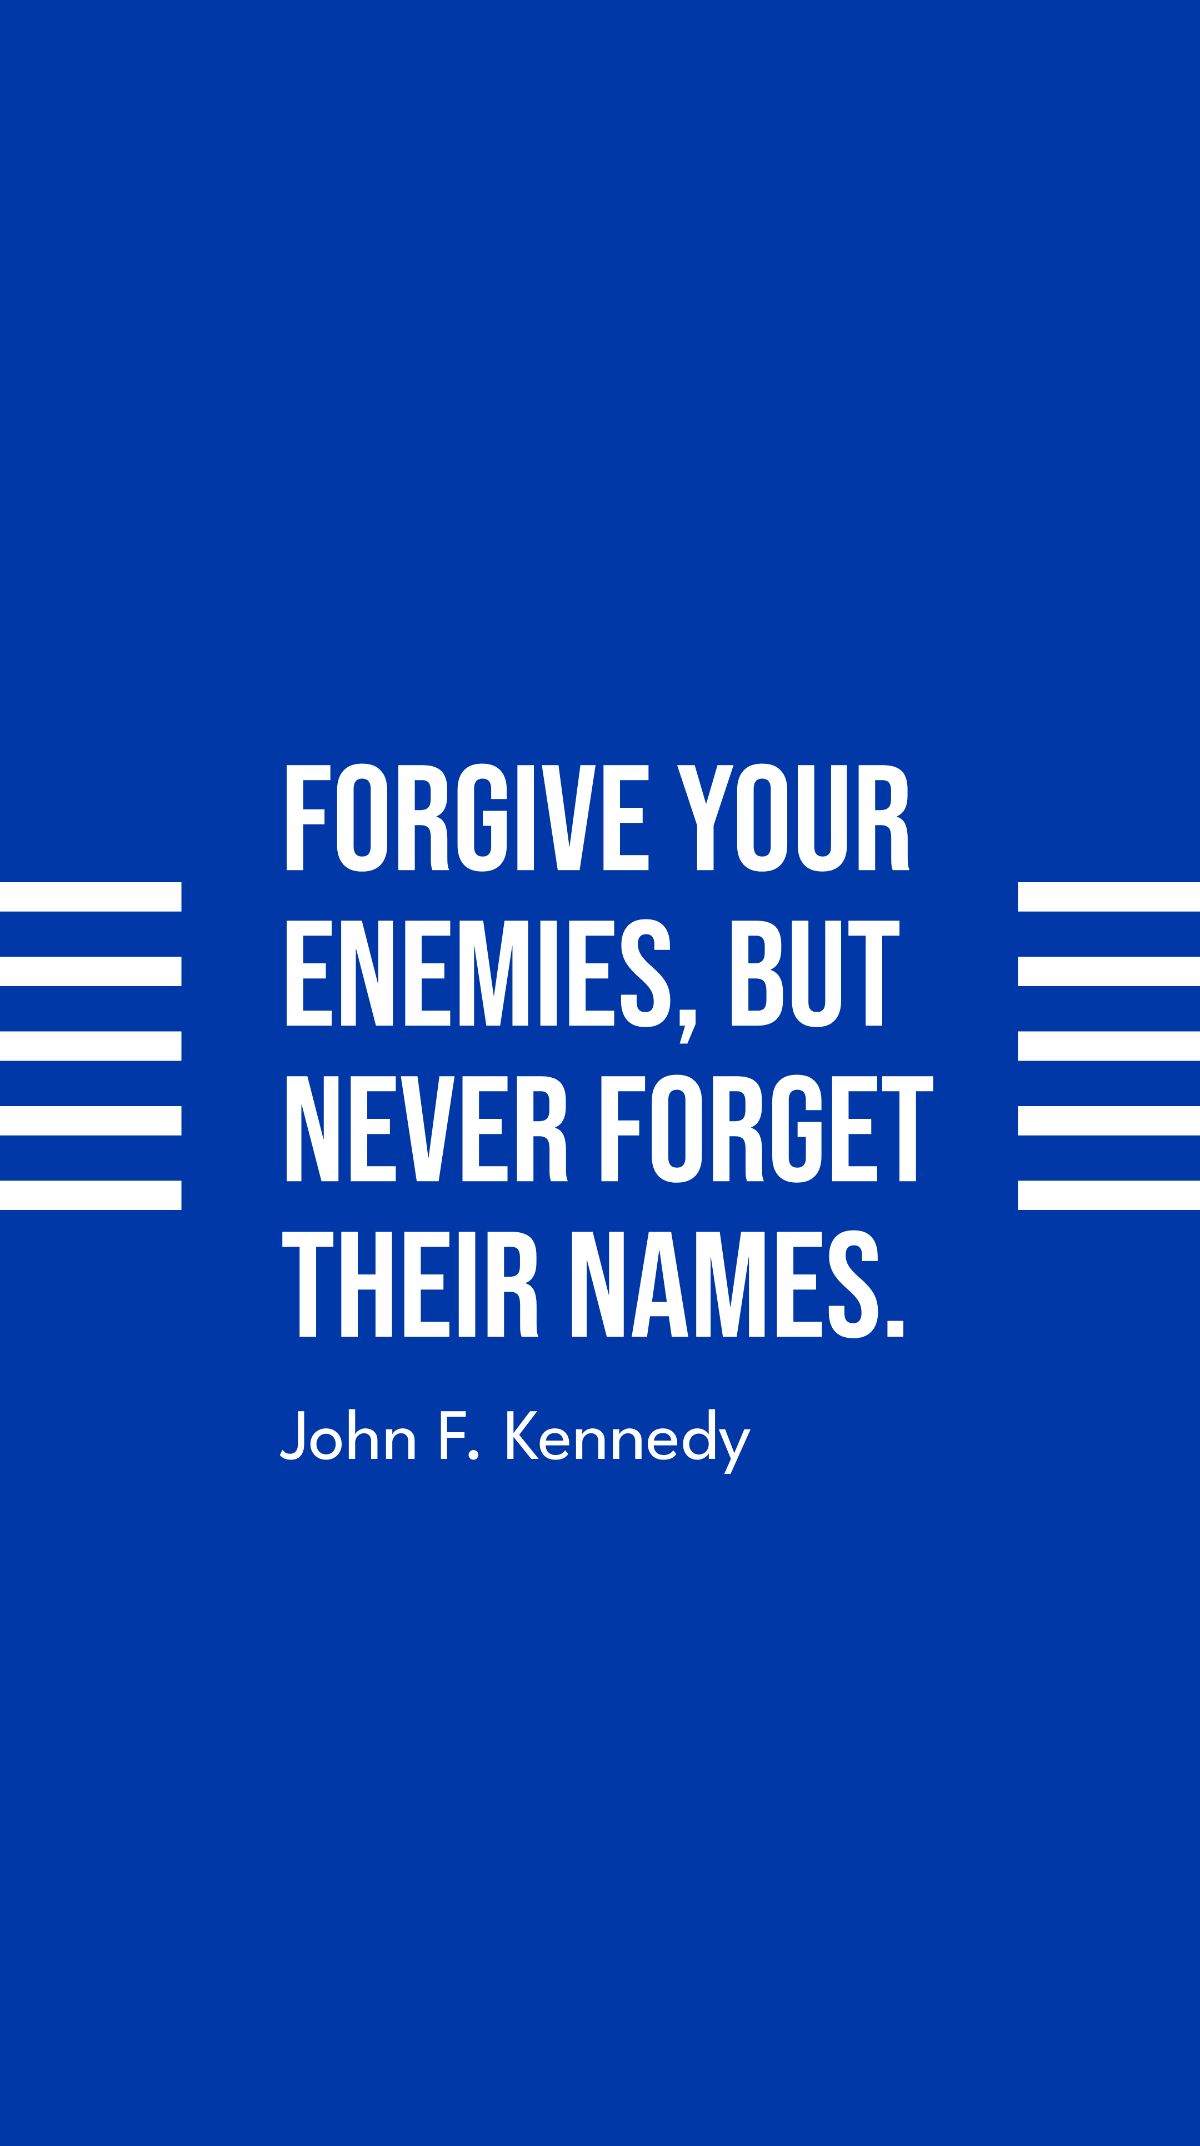 John F. Kennedy - Forgive your enemies, but never forget their names. Template